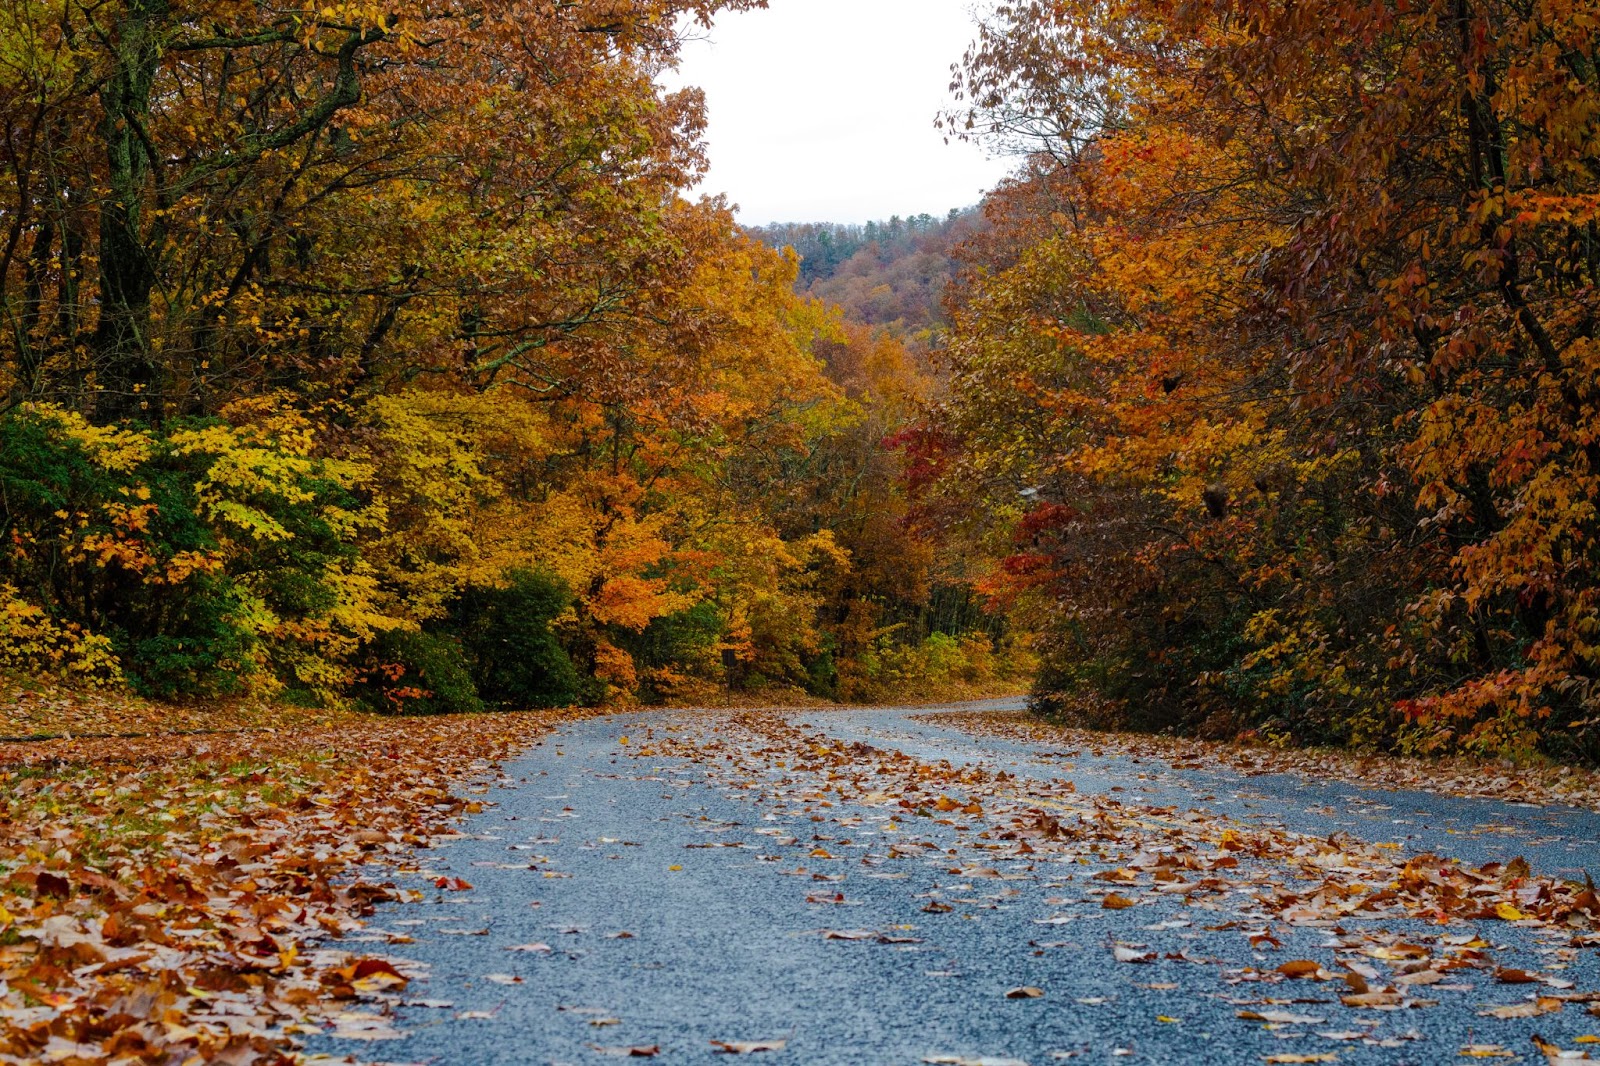 Road through the Great Smoky Mountains